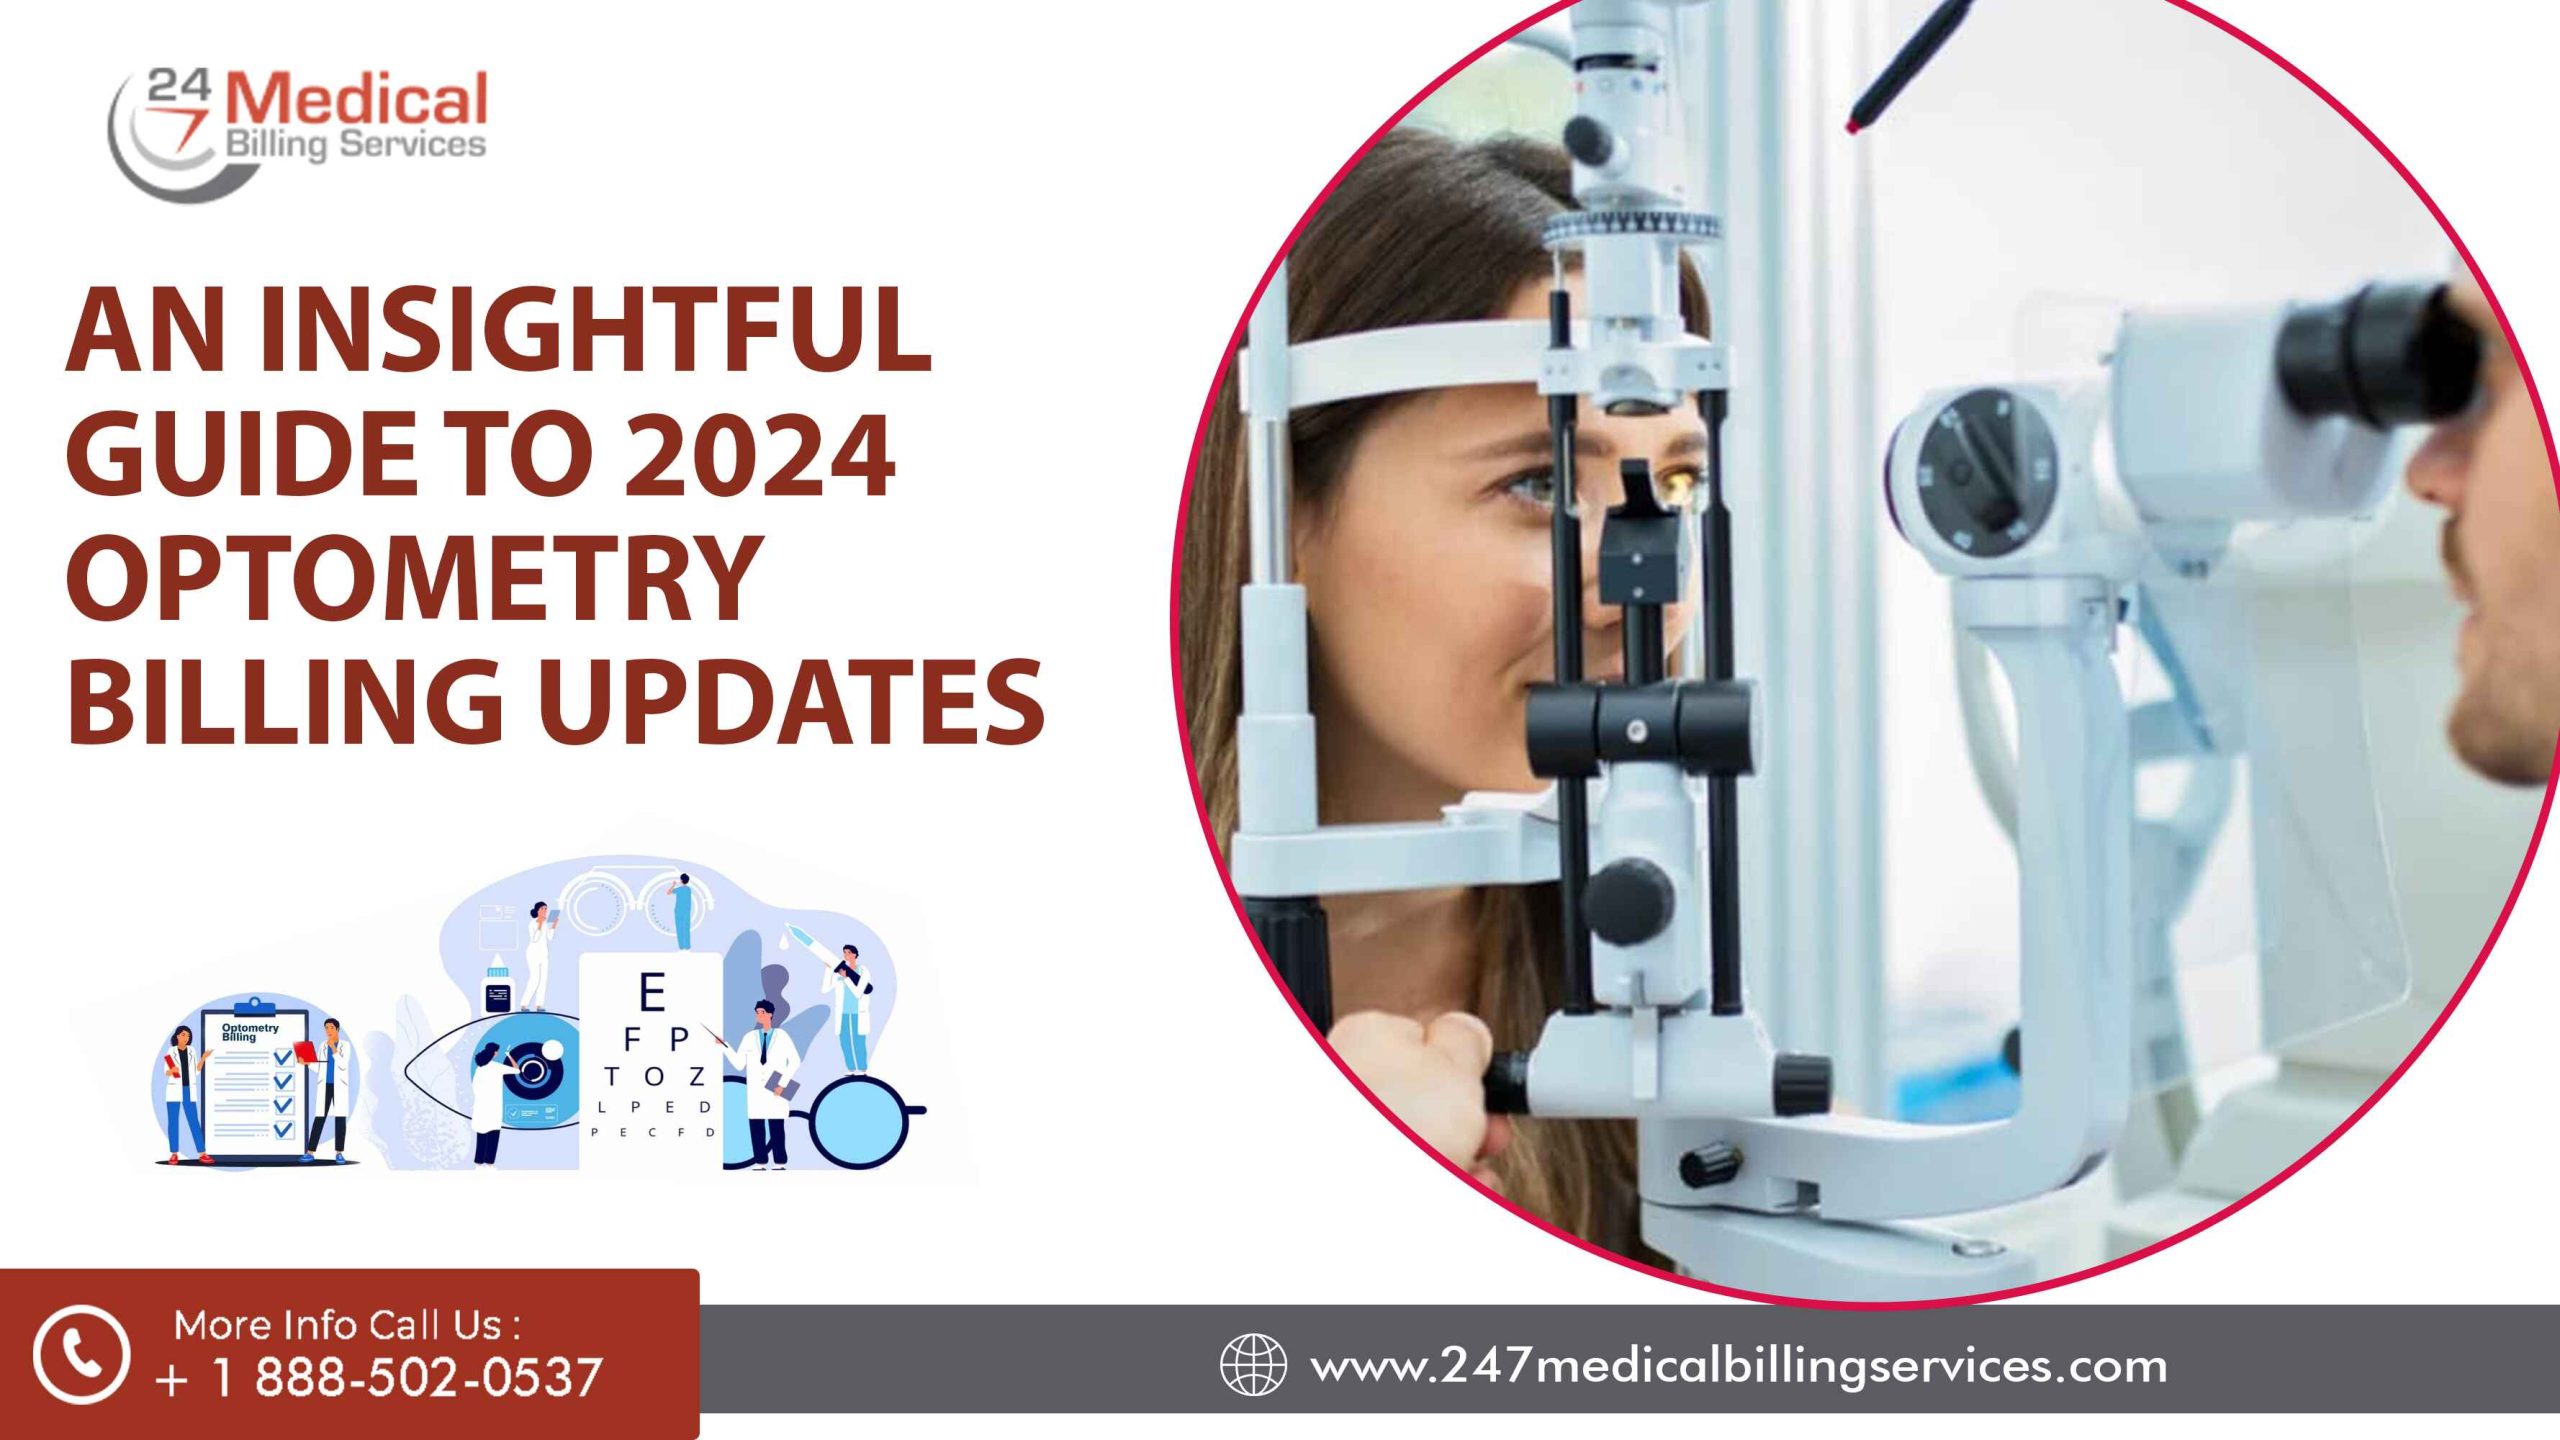  An Insightful Guide to 2024 Optometry Billing Updates